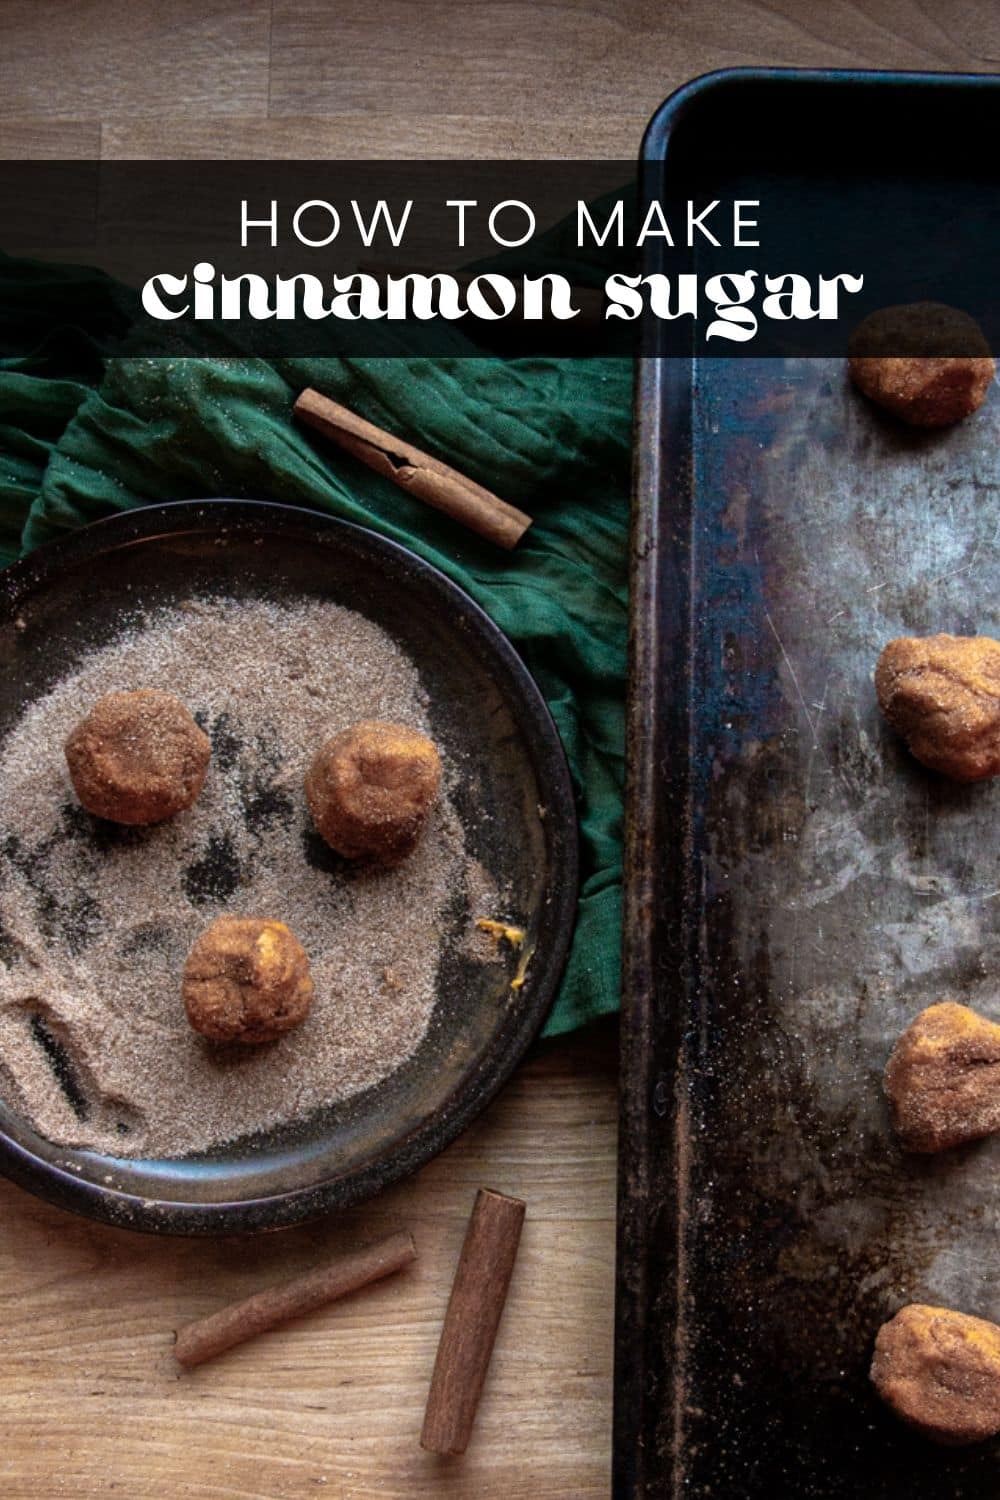 This cinnamon and sugar recipe has the perfect ratio of spice to sweetness. With just the right amount of each ingredient, you can create a delicious topping or filling for your favorite treats!